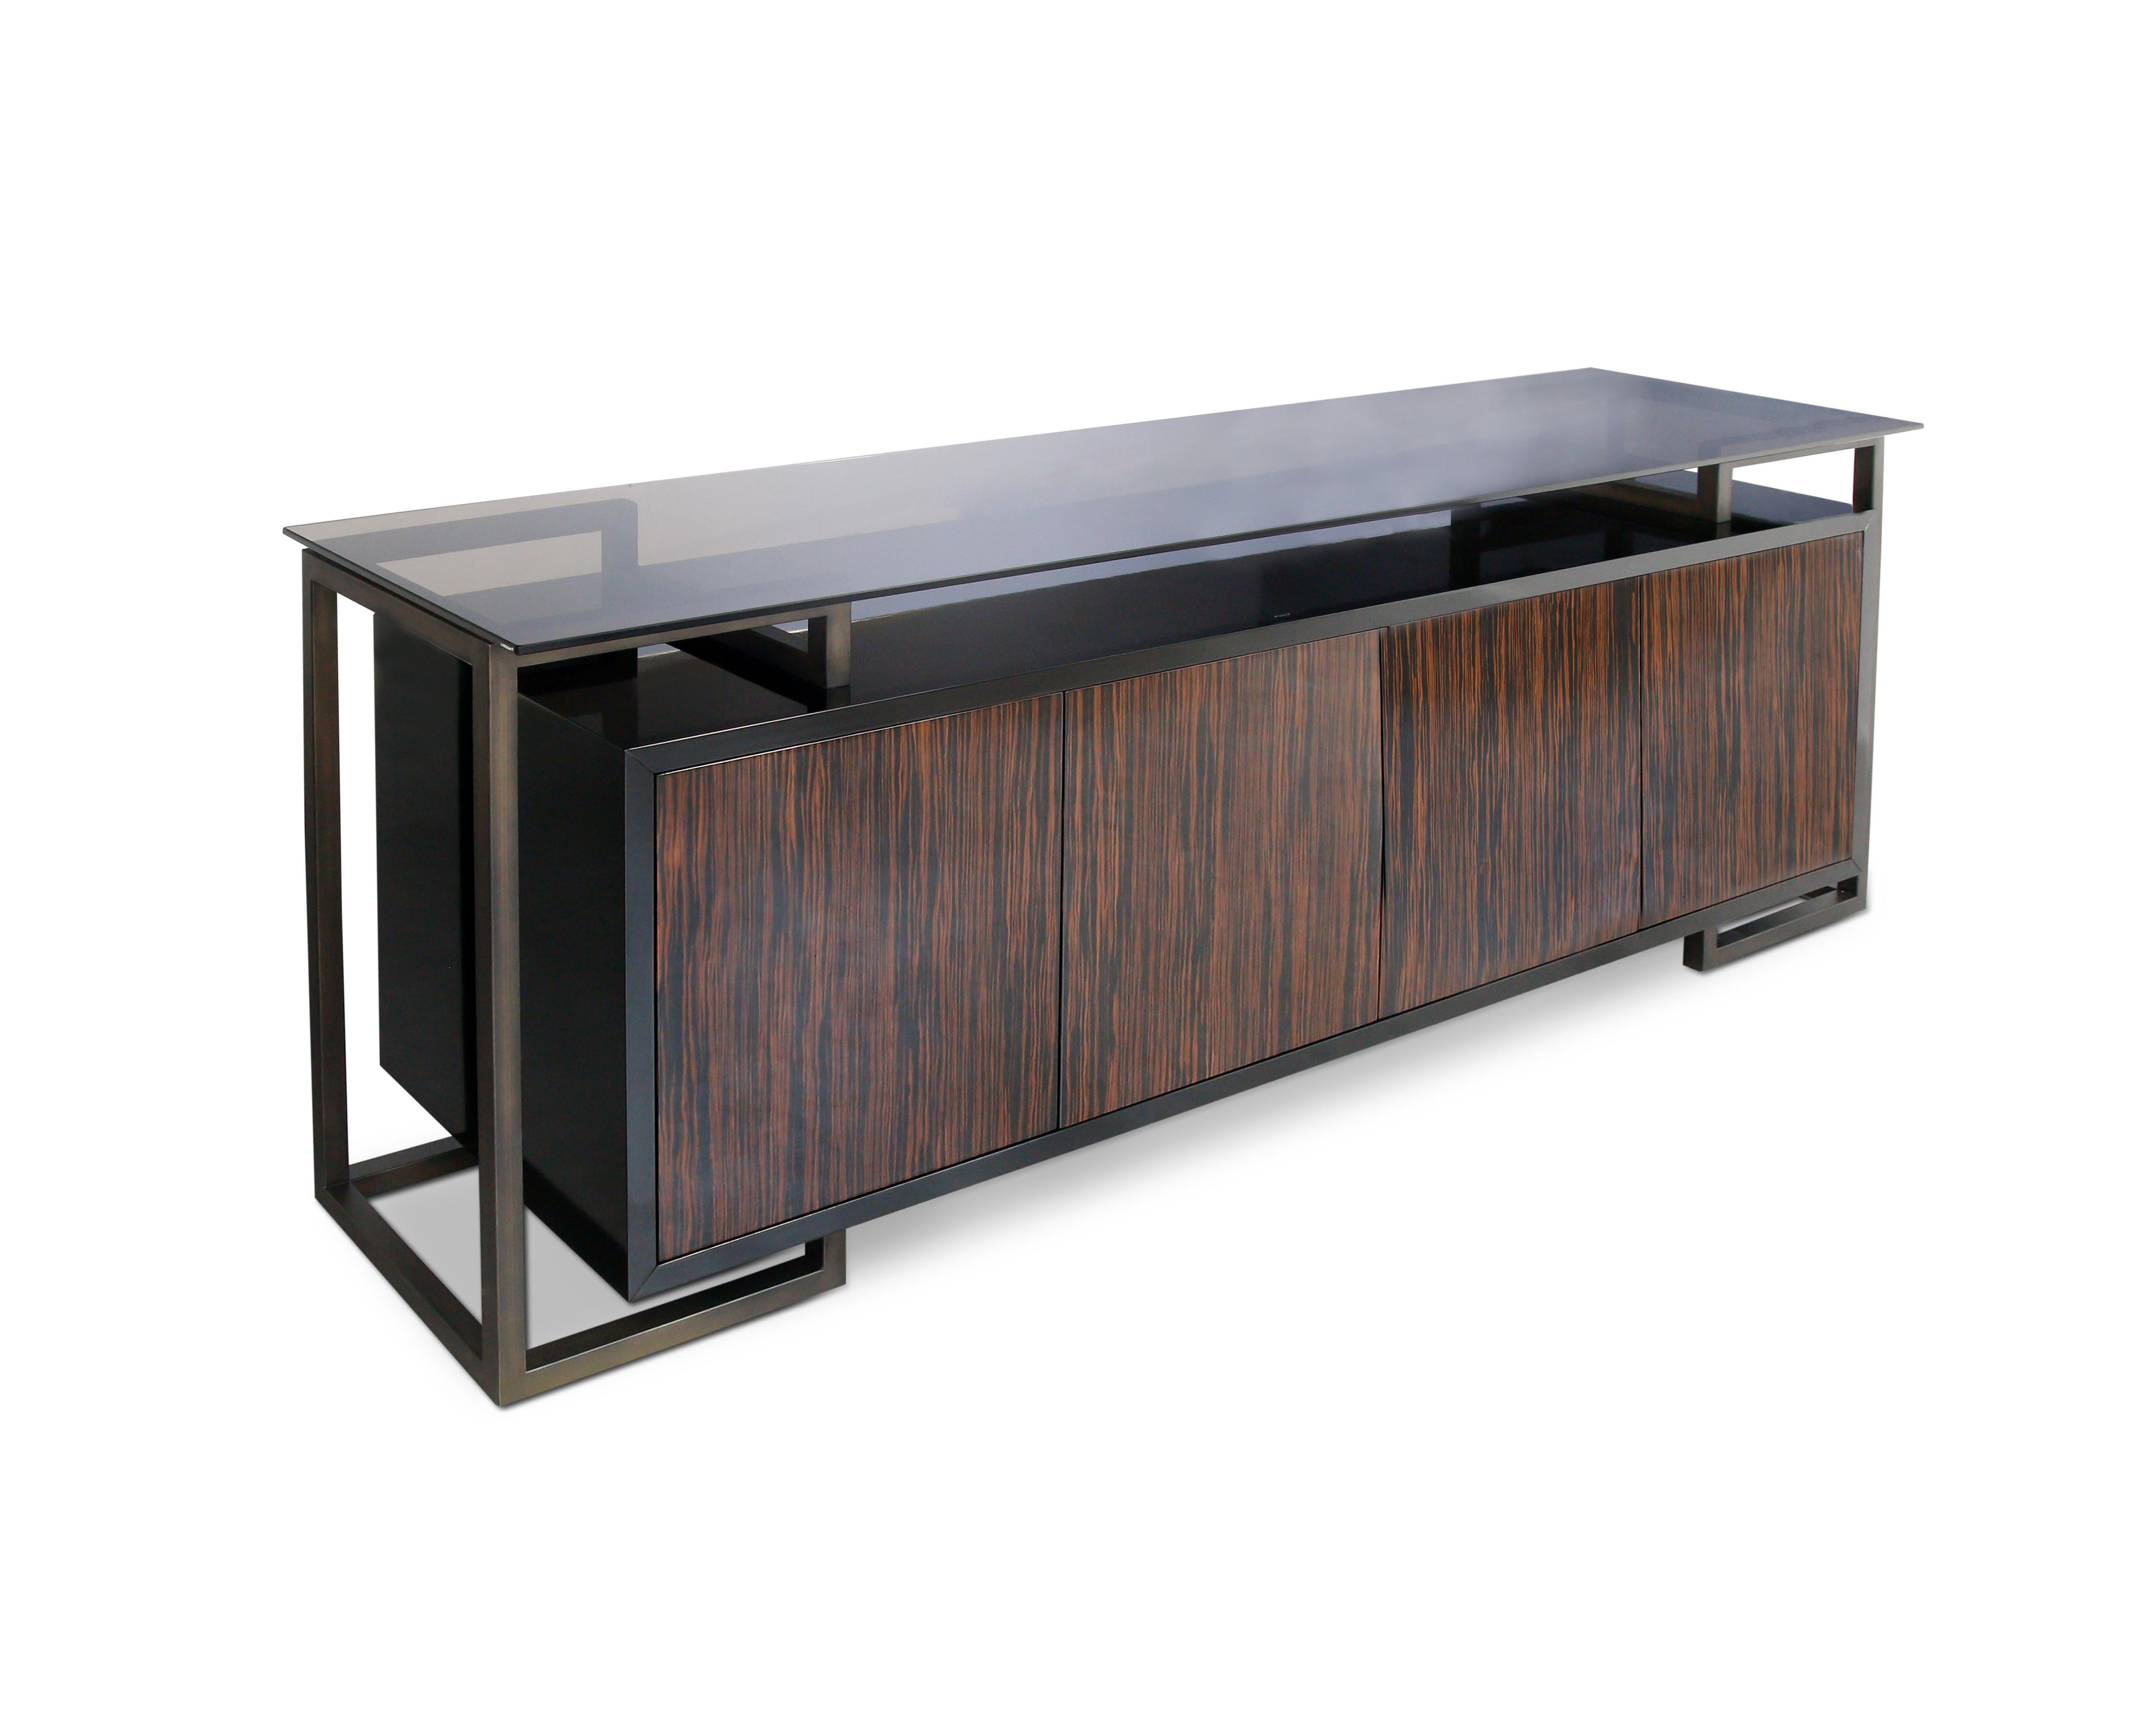 
Introducing our industrial-style sideboard, a stunning fusion of form and function that seamlessly blends modern aesthetics with timeless craftsmanship. Crafted with a lacquered iron base, this piece boasts a robust foundation, while its high-gloss